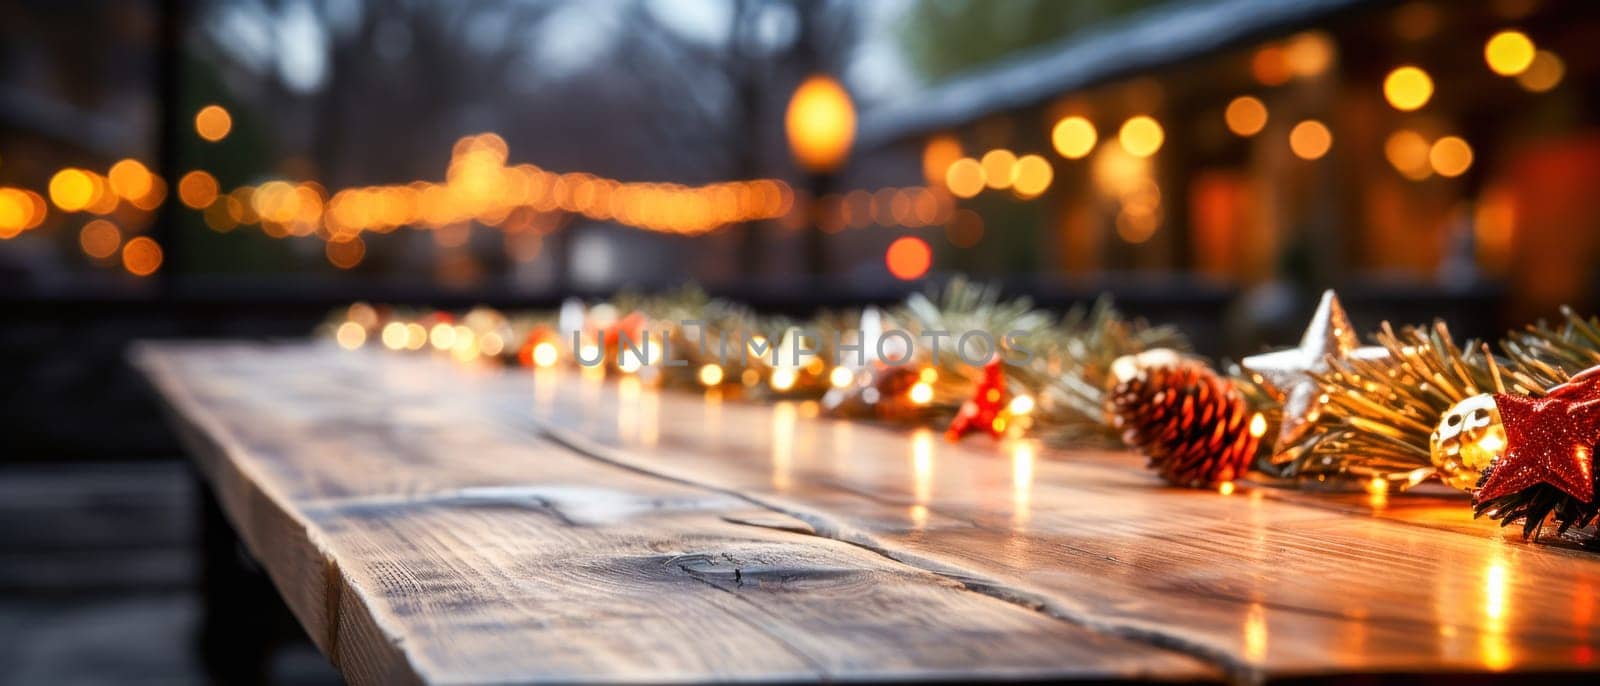 Sparkling holiday lights, reflected on the wooden surface of the table, create a unique atmosphere of magic and comfort, filling the space with warmth and joy.